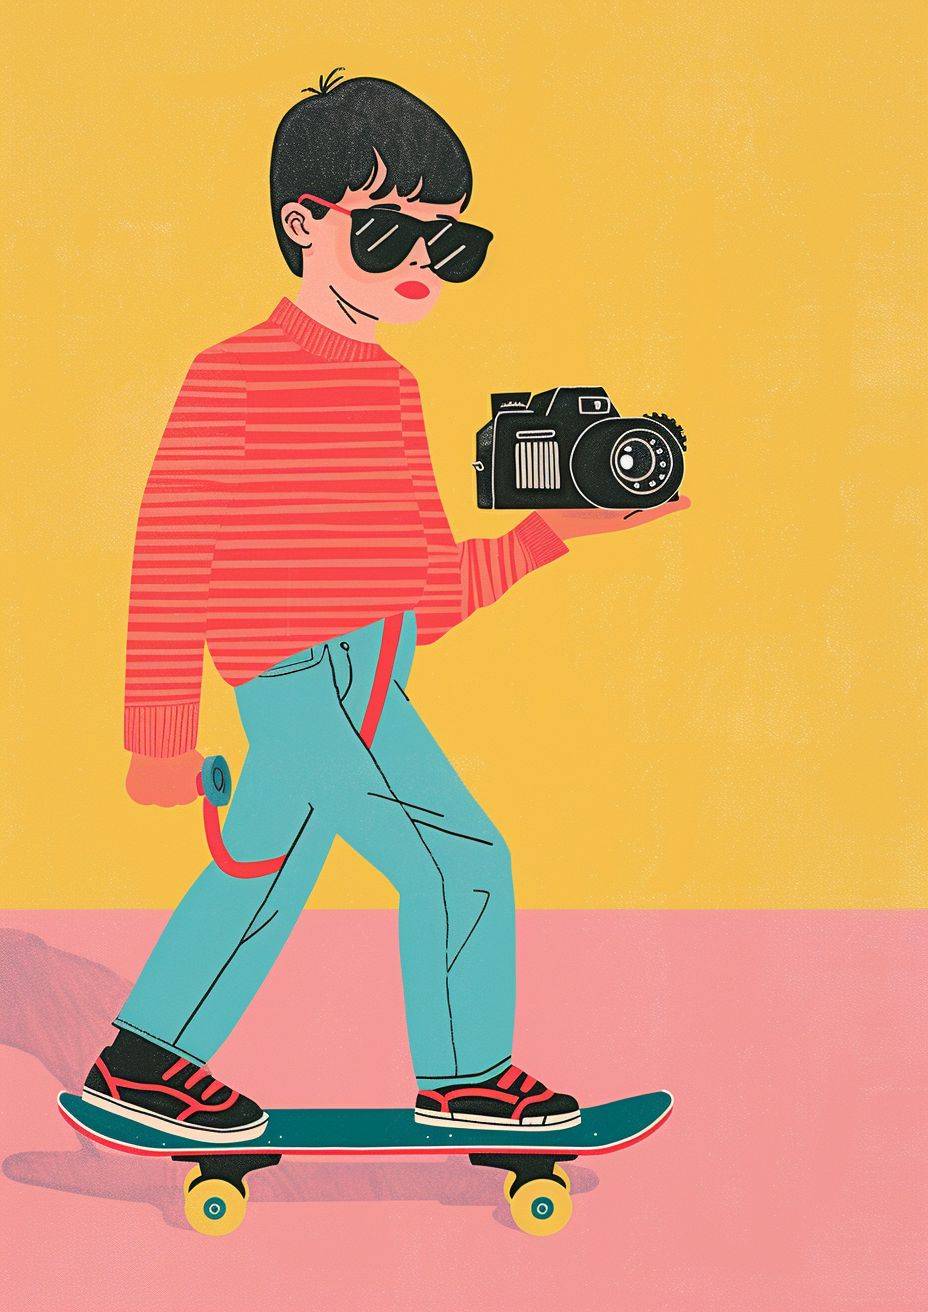 Art by Joan Cornella in Peter Bagge style, a boy with mullet hairstyle playing skateboard with holding a handycam, wearing black artsy sunglasses.